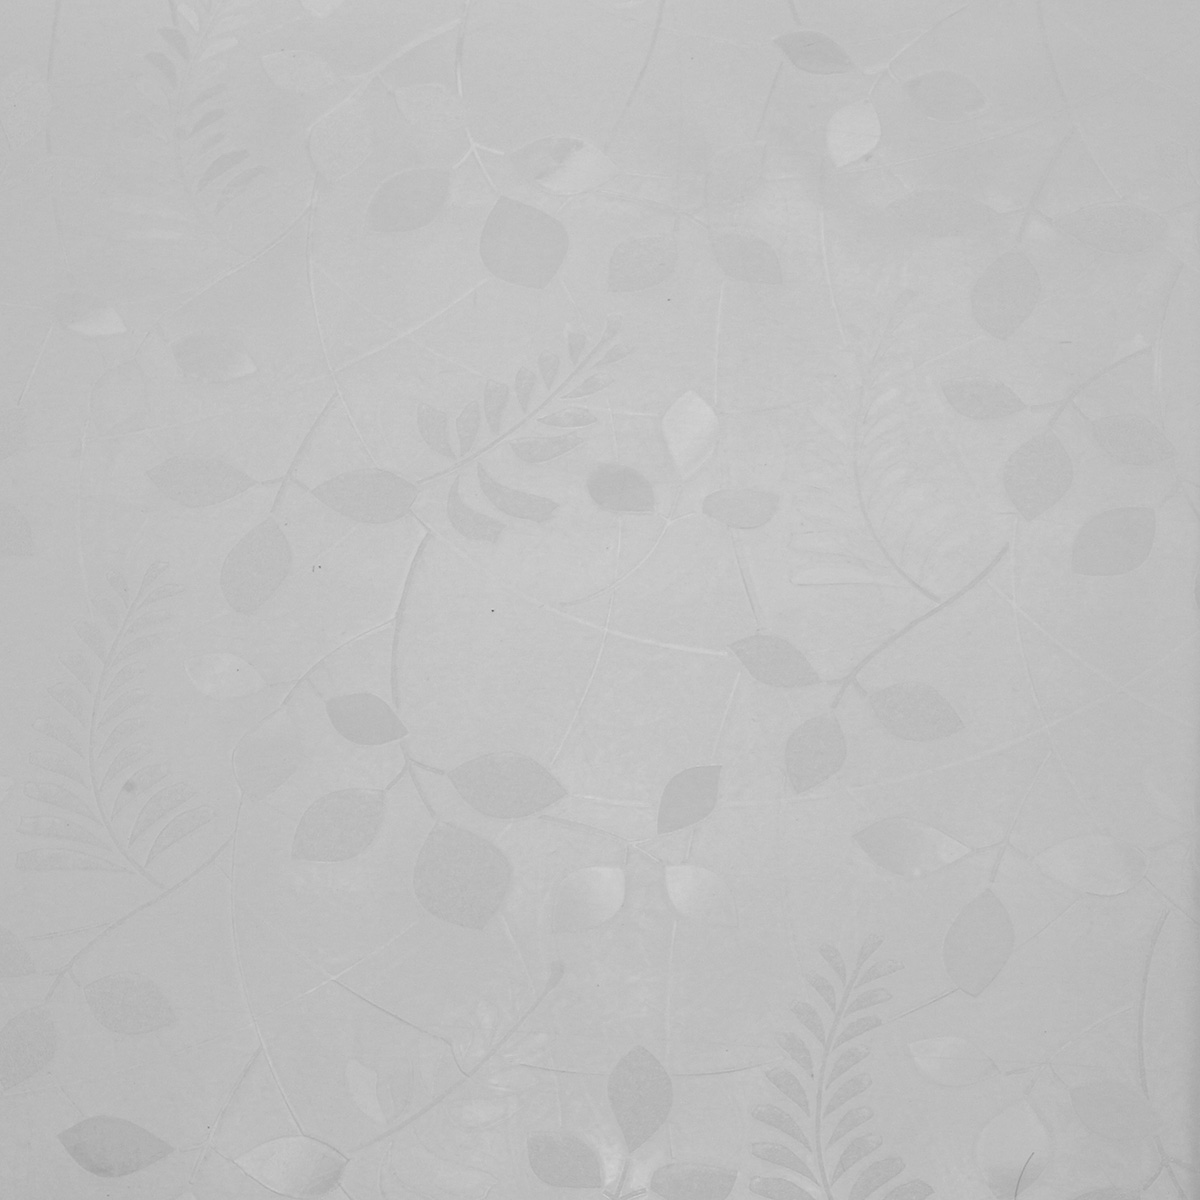 Find 3D Privacy Window Film Decorative Non Adhesive Frosted Pattern Glass Sticker DIY for Sale on Gipsybee.com with cryptocurrencies